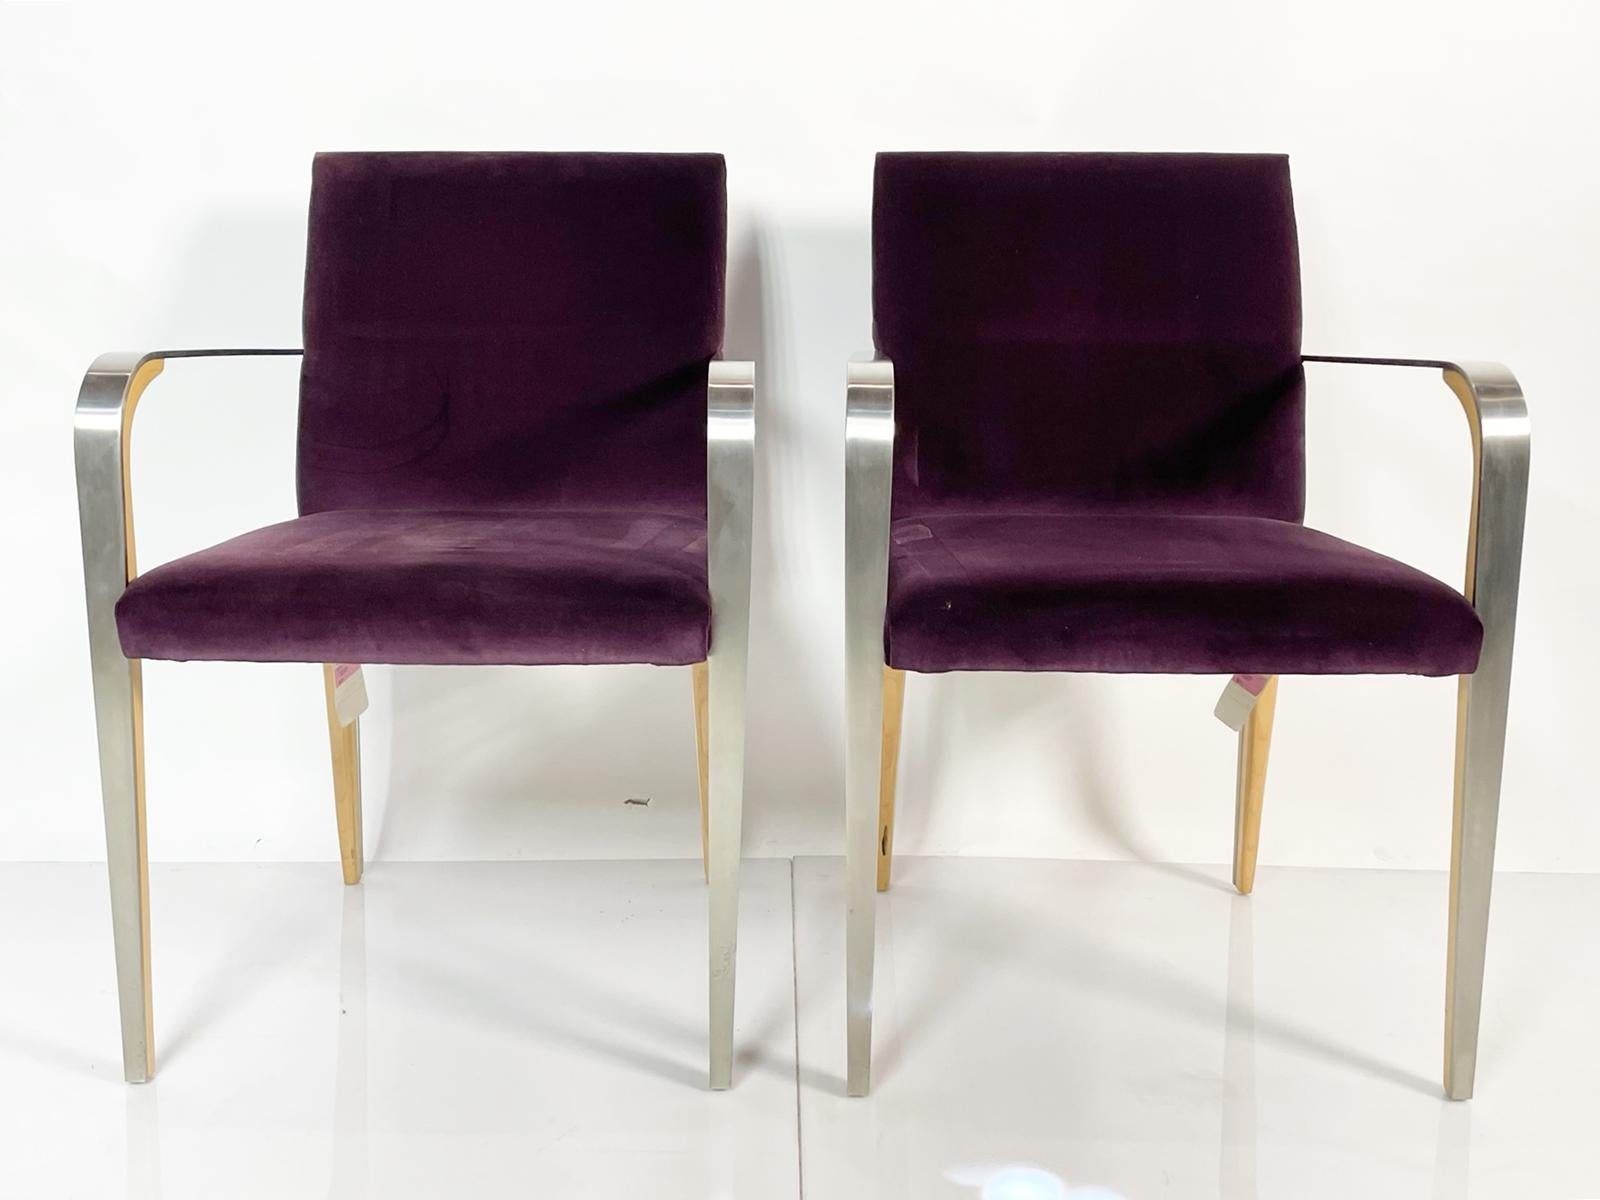 Pair of Armchairs with Metal & Wood Frames by Bernhardt In Good Condition For Sale In Los Angeles, CA